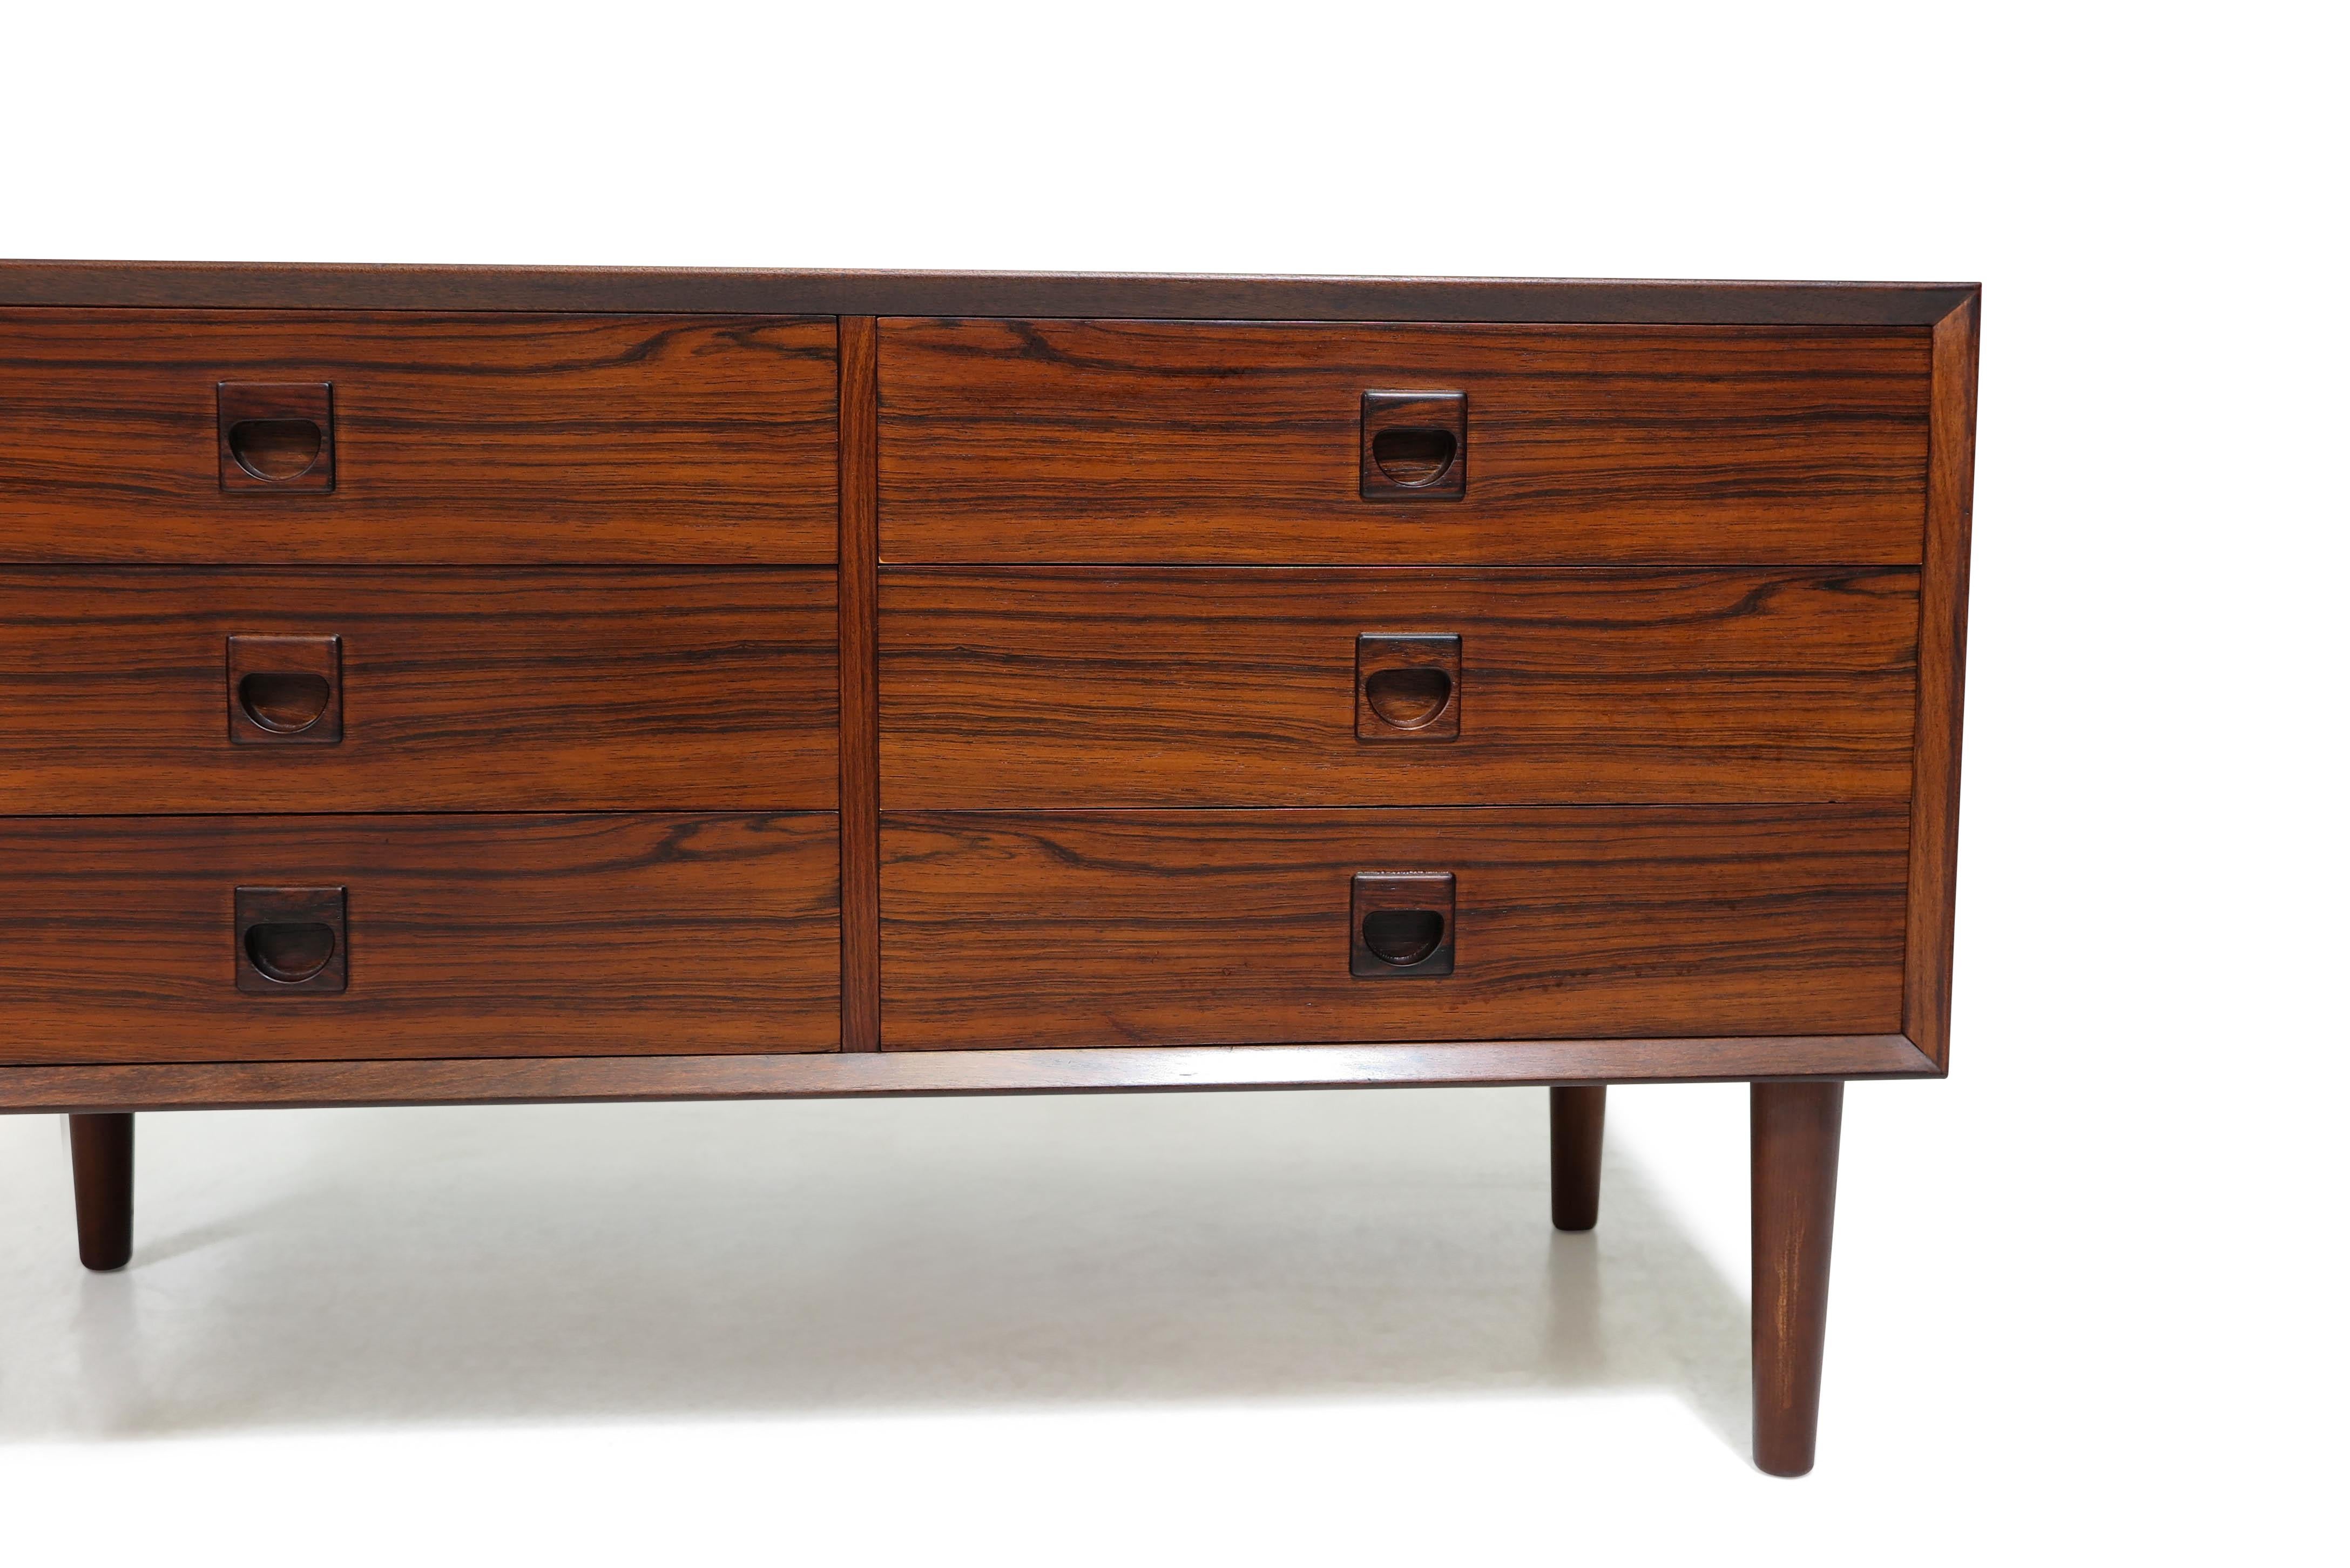 Danish low chest of drawers by Brouer Mobelfabrik, manufactured in Denmark, 1965. Crafted from rosewood, the cabinet features tapered mitered edges and six drawers with square recessed pulls. Interior drawers are crafted from mahogany. Versatile in